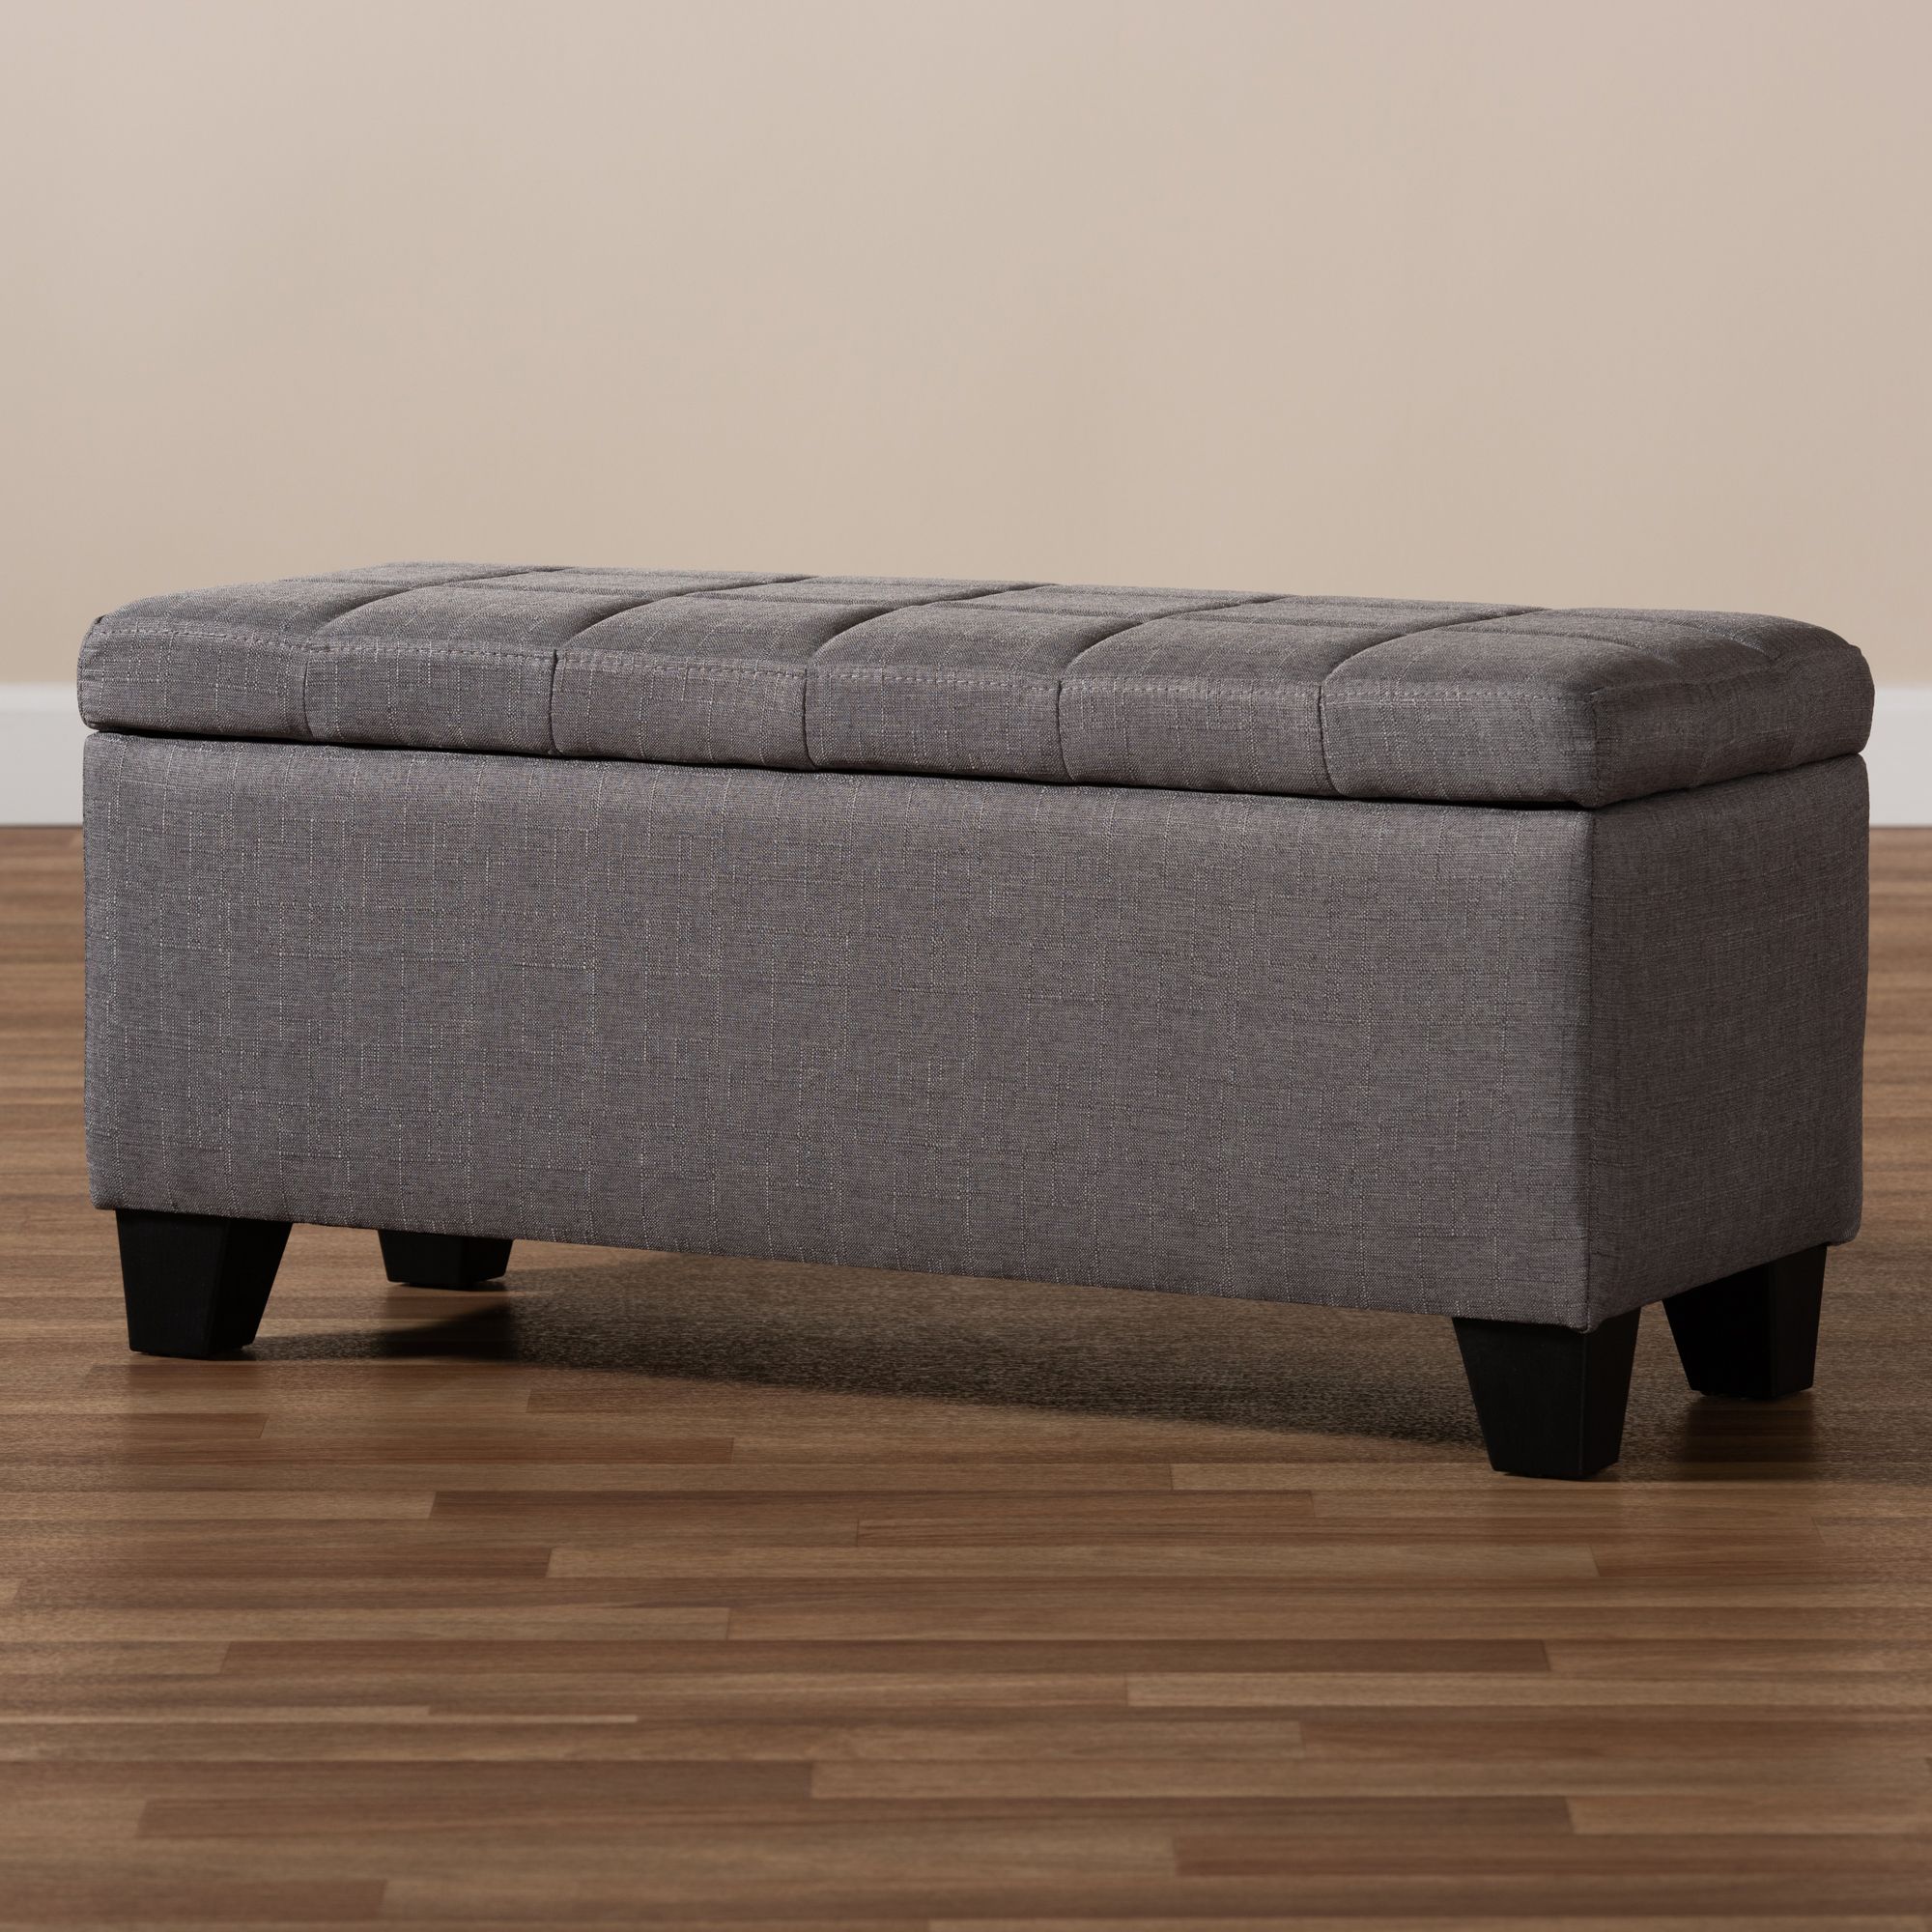 Fera Contemporary Biscuit Tufted Fabric Upholstery 35" Storage Bench Within Fabric Tufted Storage Ottomans (View 6 of 20)